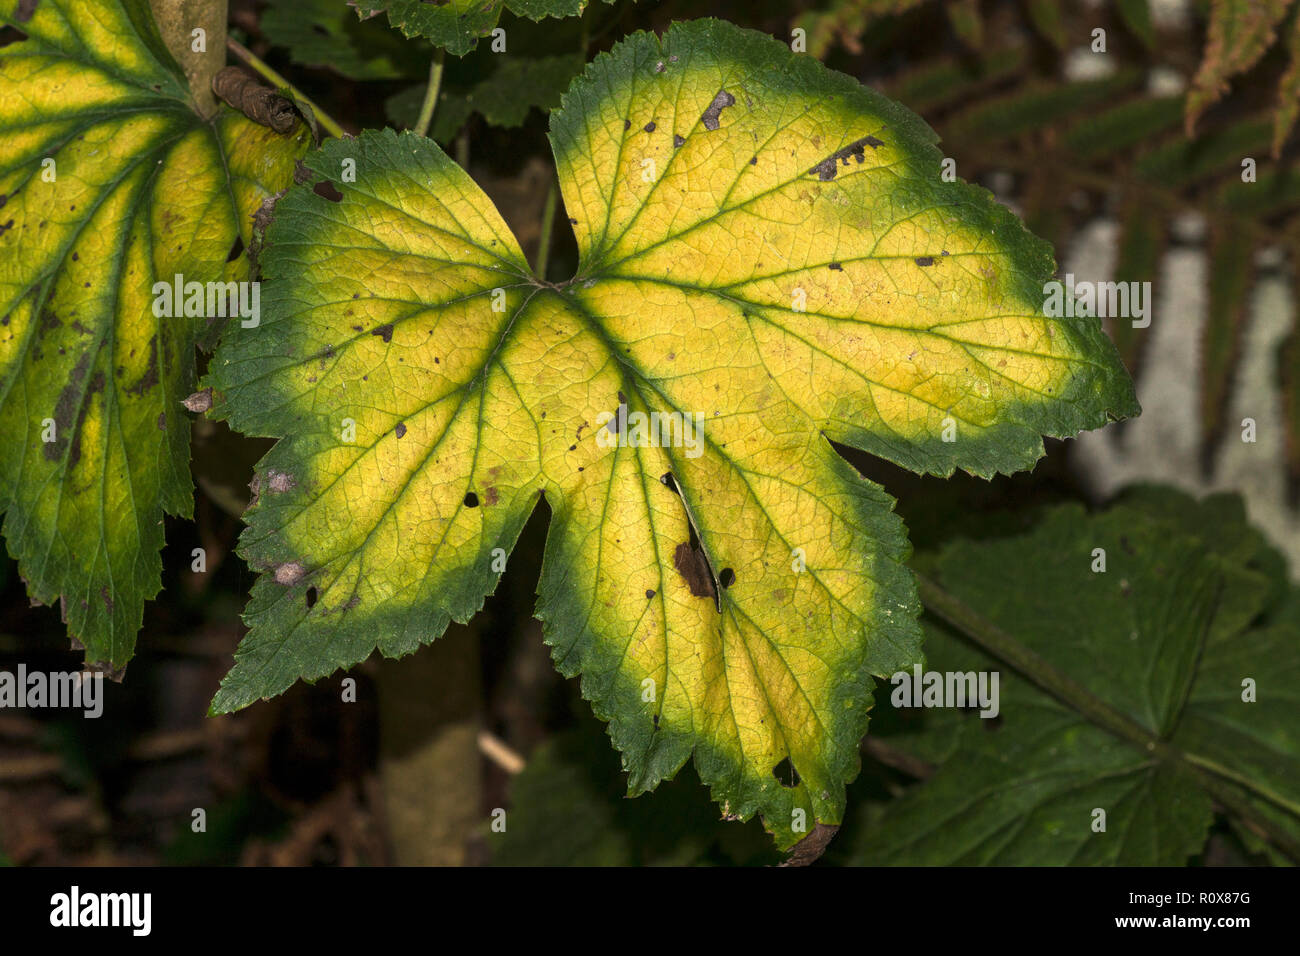 Anemone x hybrida. Leaf affected by a shortage of magnesium in the soil. Stock Photo